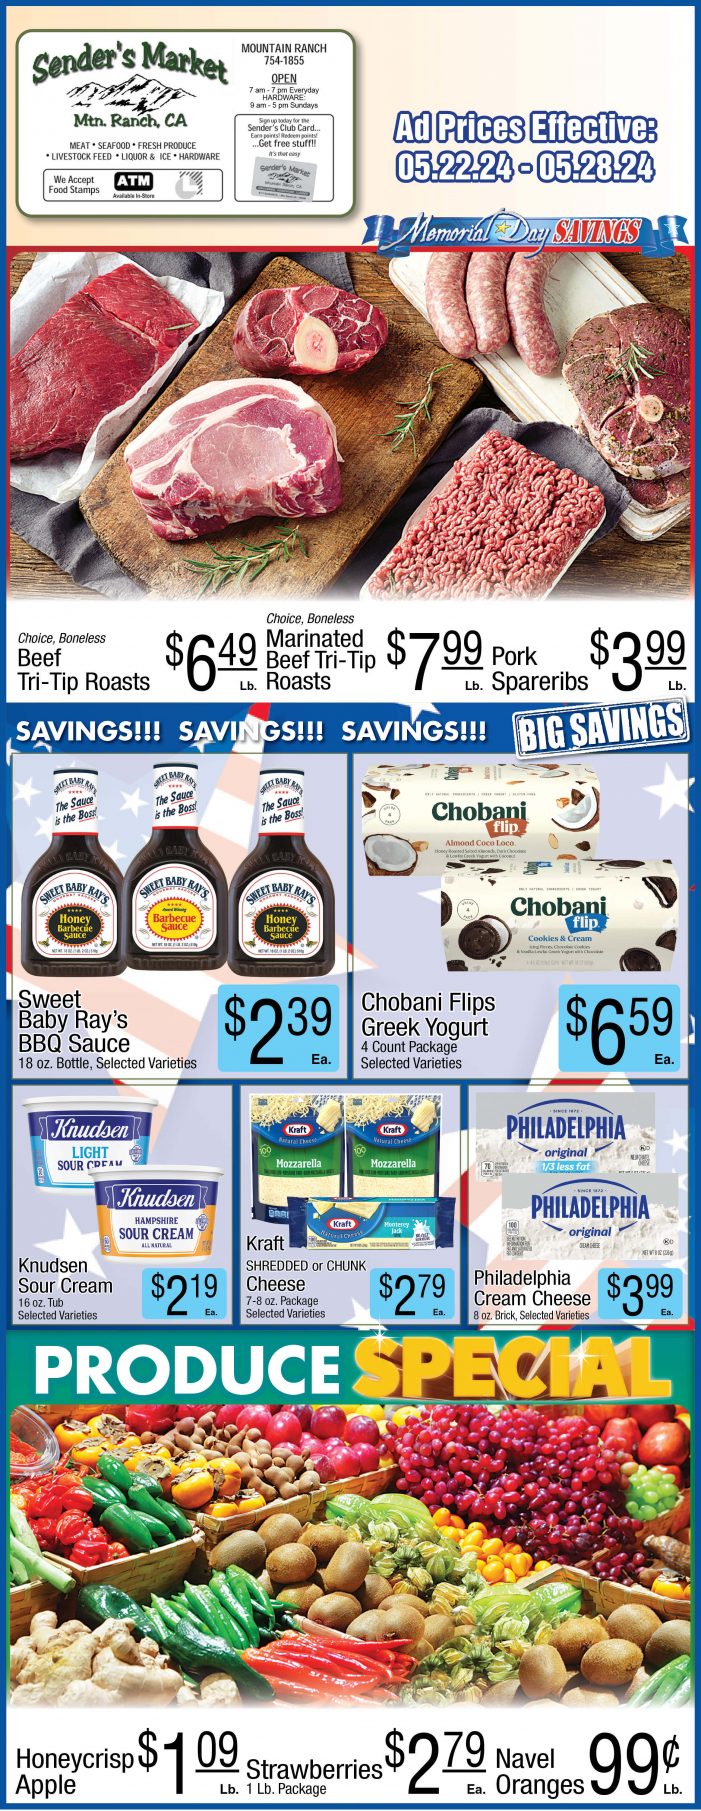 Sender’s Market Weekly Ad & Grocery Specials Through May 28th! Shop Local & Save!!